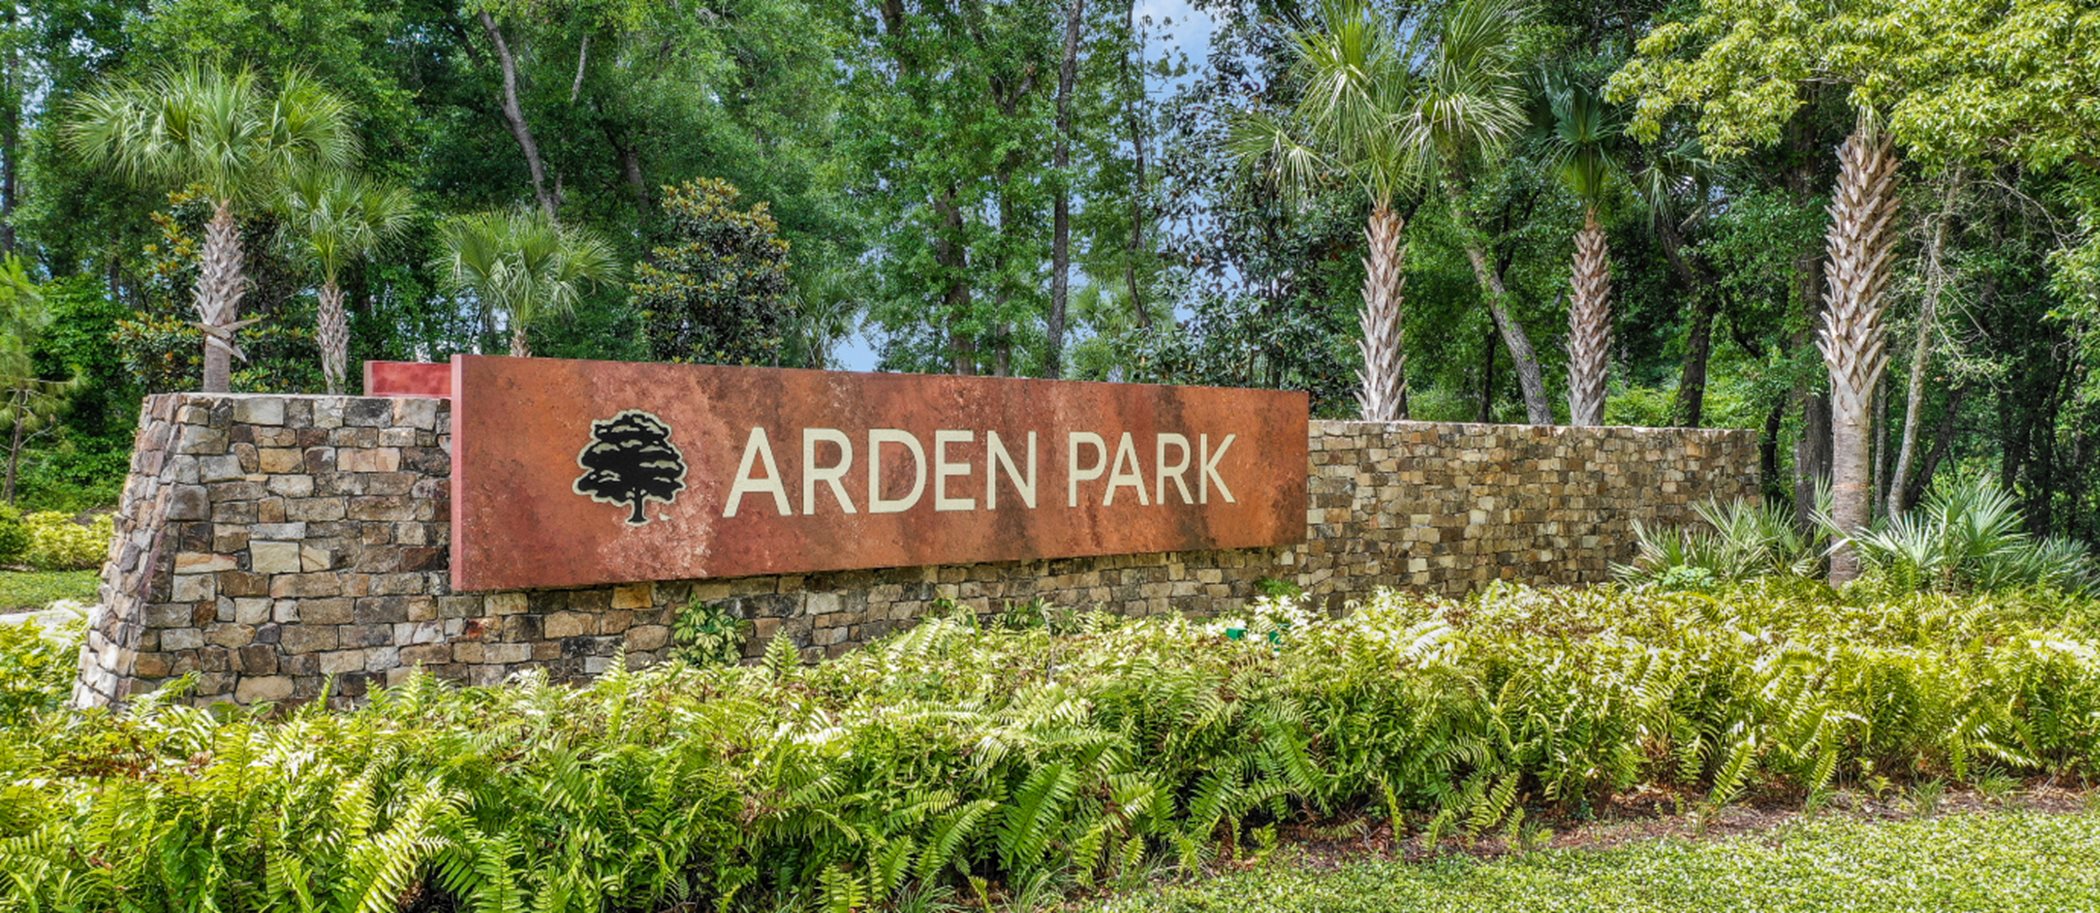 Arden Park North Manors Signboard